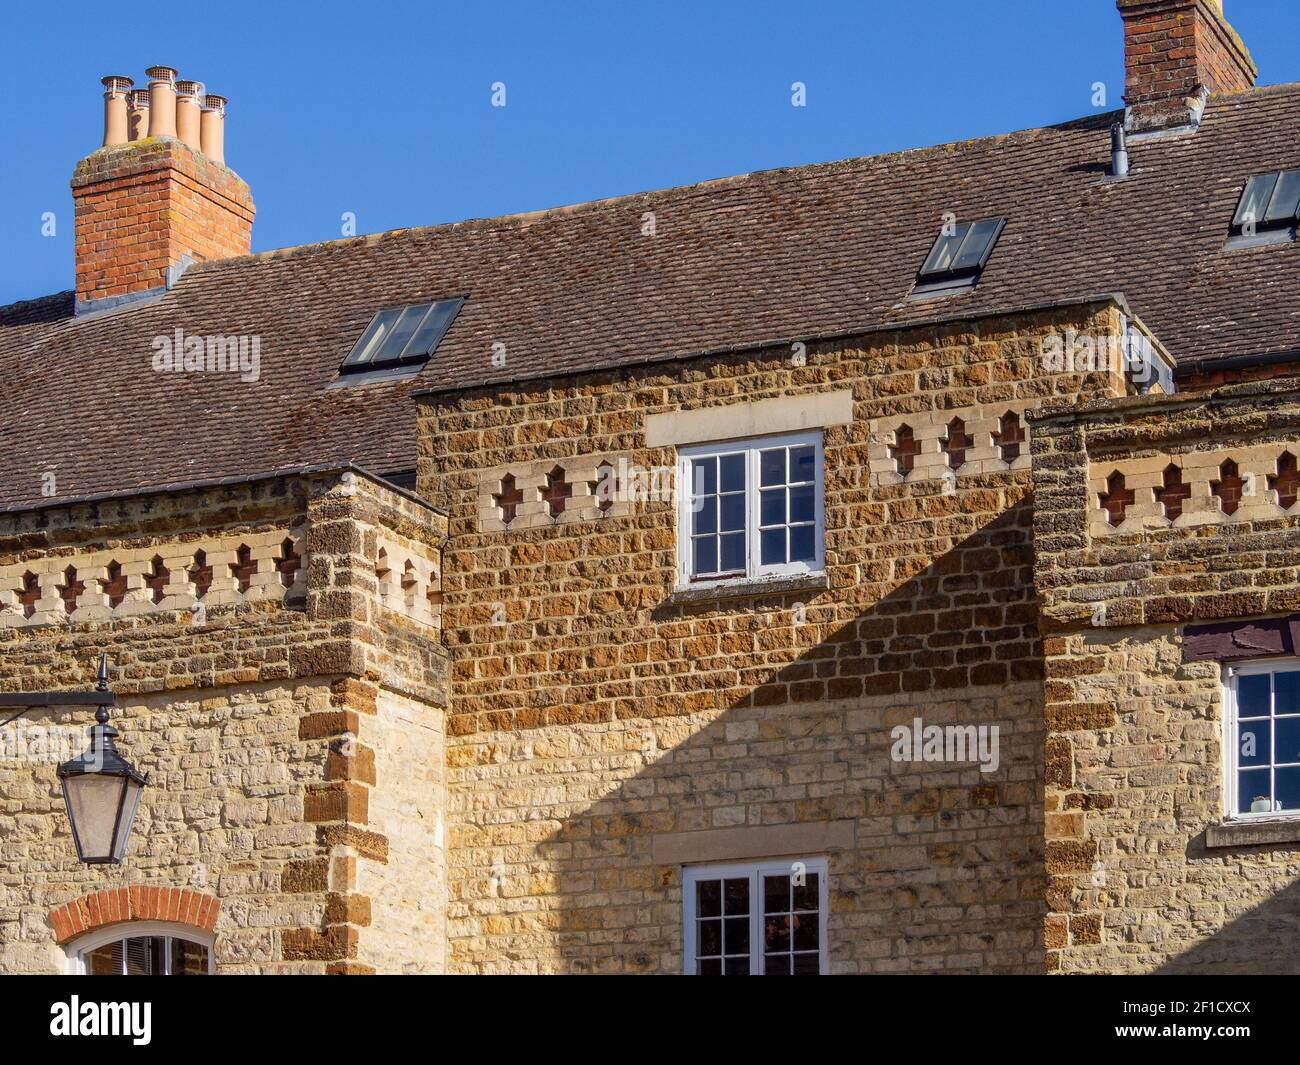 Close up of the roofline of a stone built building with a carved decorative stone frieze, Towcester, Northamptonshire, England, UK Stock Photo